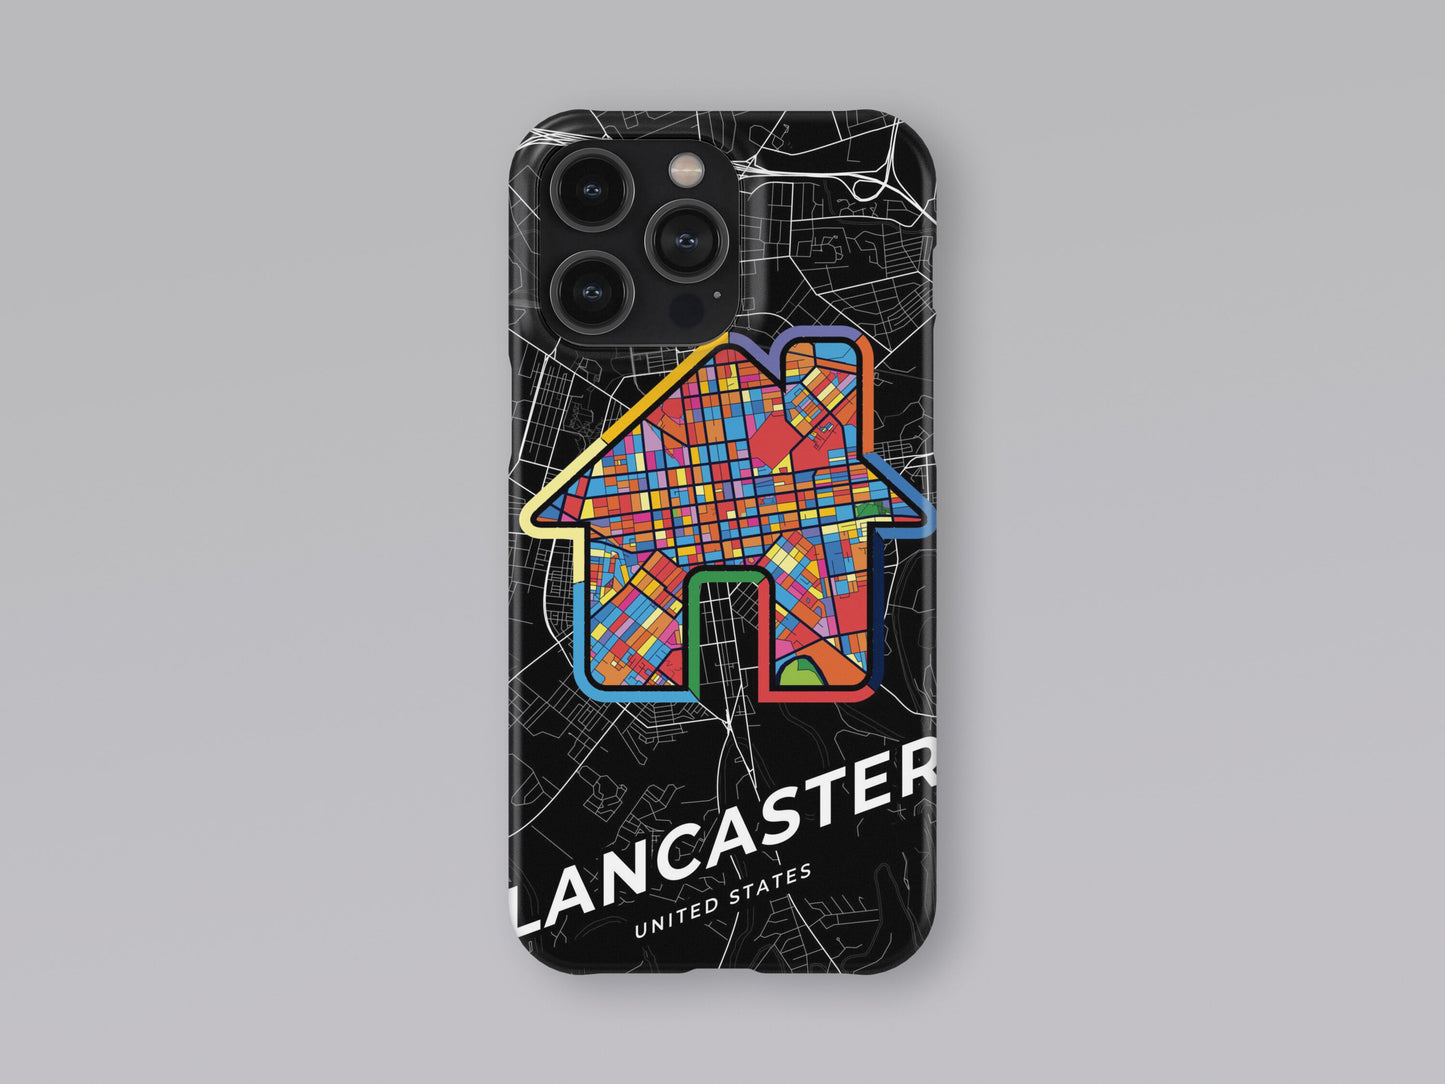 Lancaster Pennsylvania slim phone case with colorful icon. Birthday, wedding or housewarming gift. Couple match cases. 3